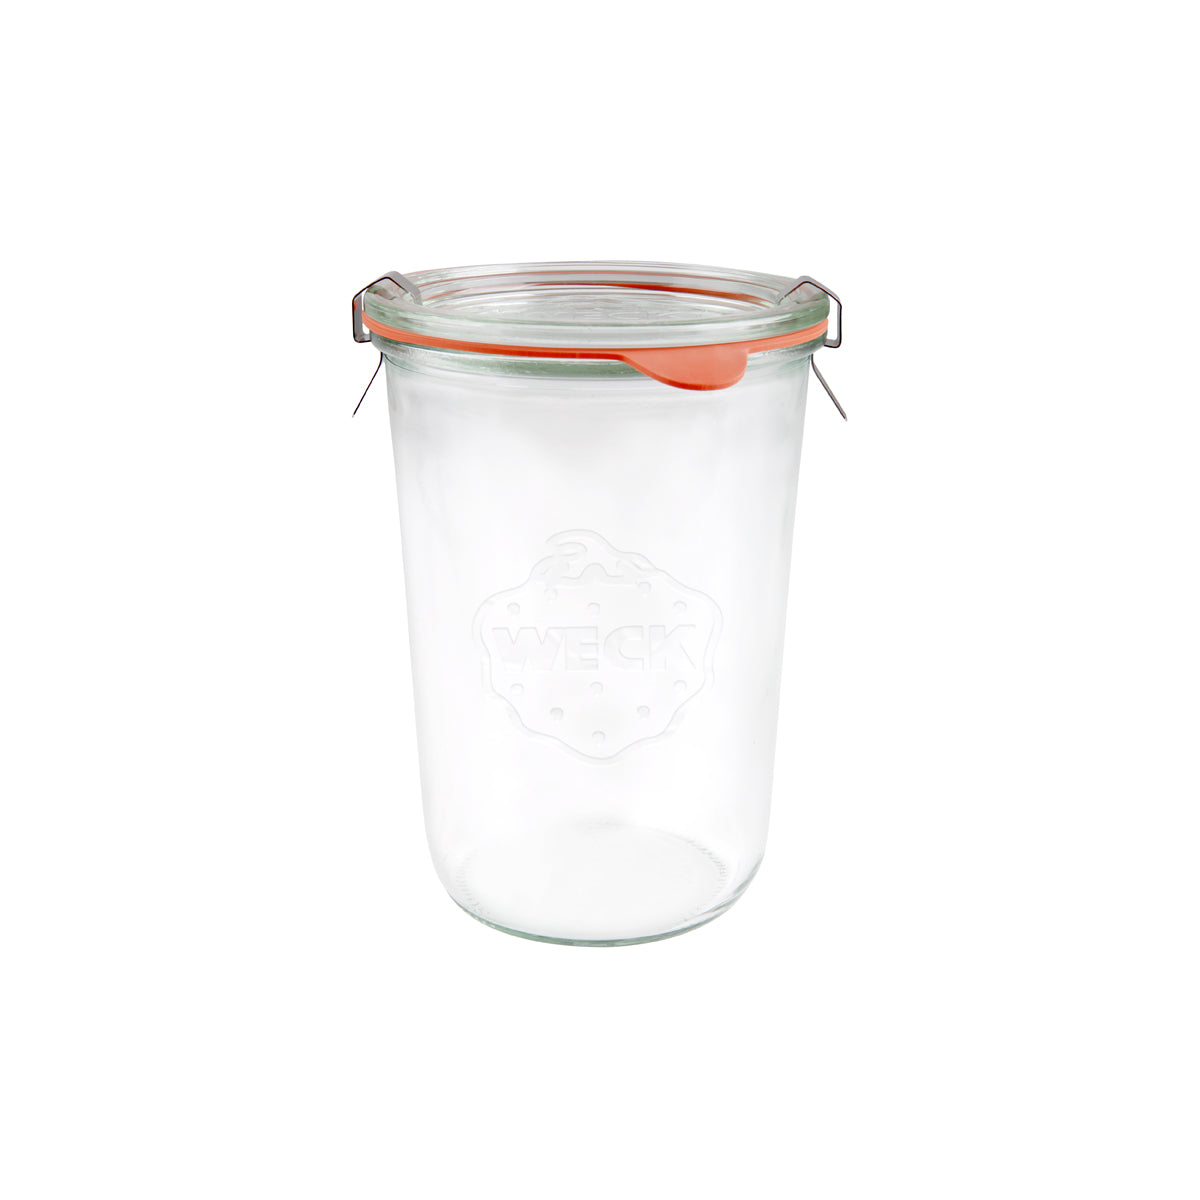 Complete Glass Jar with Lid,Seal and clamps (743)  850ml , 100x147mm: Pack of 6